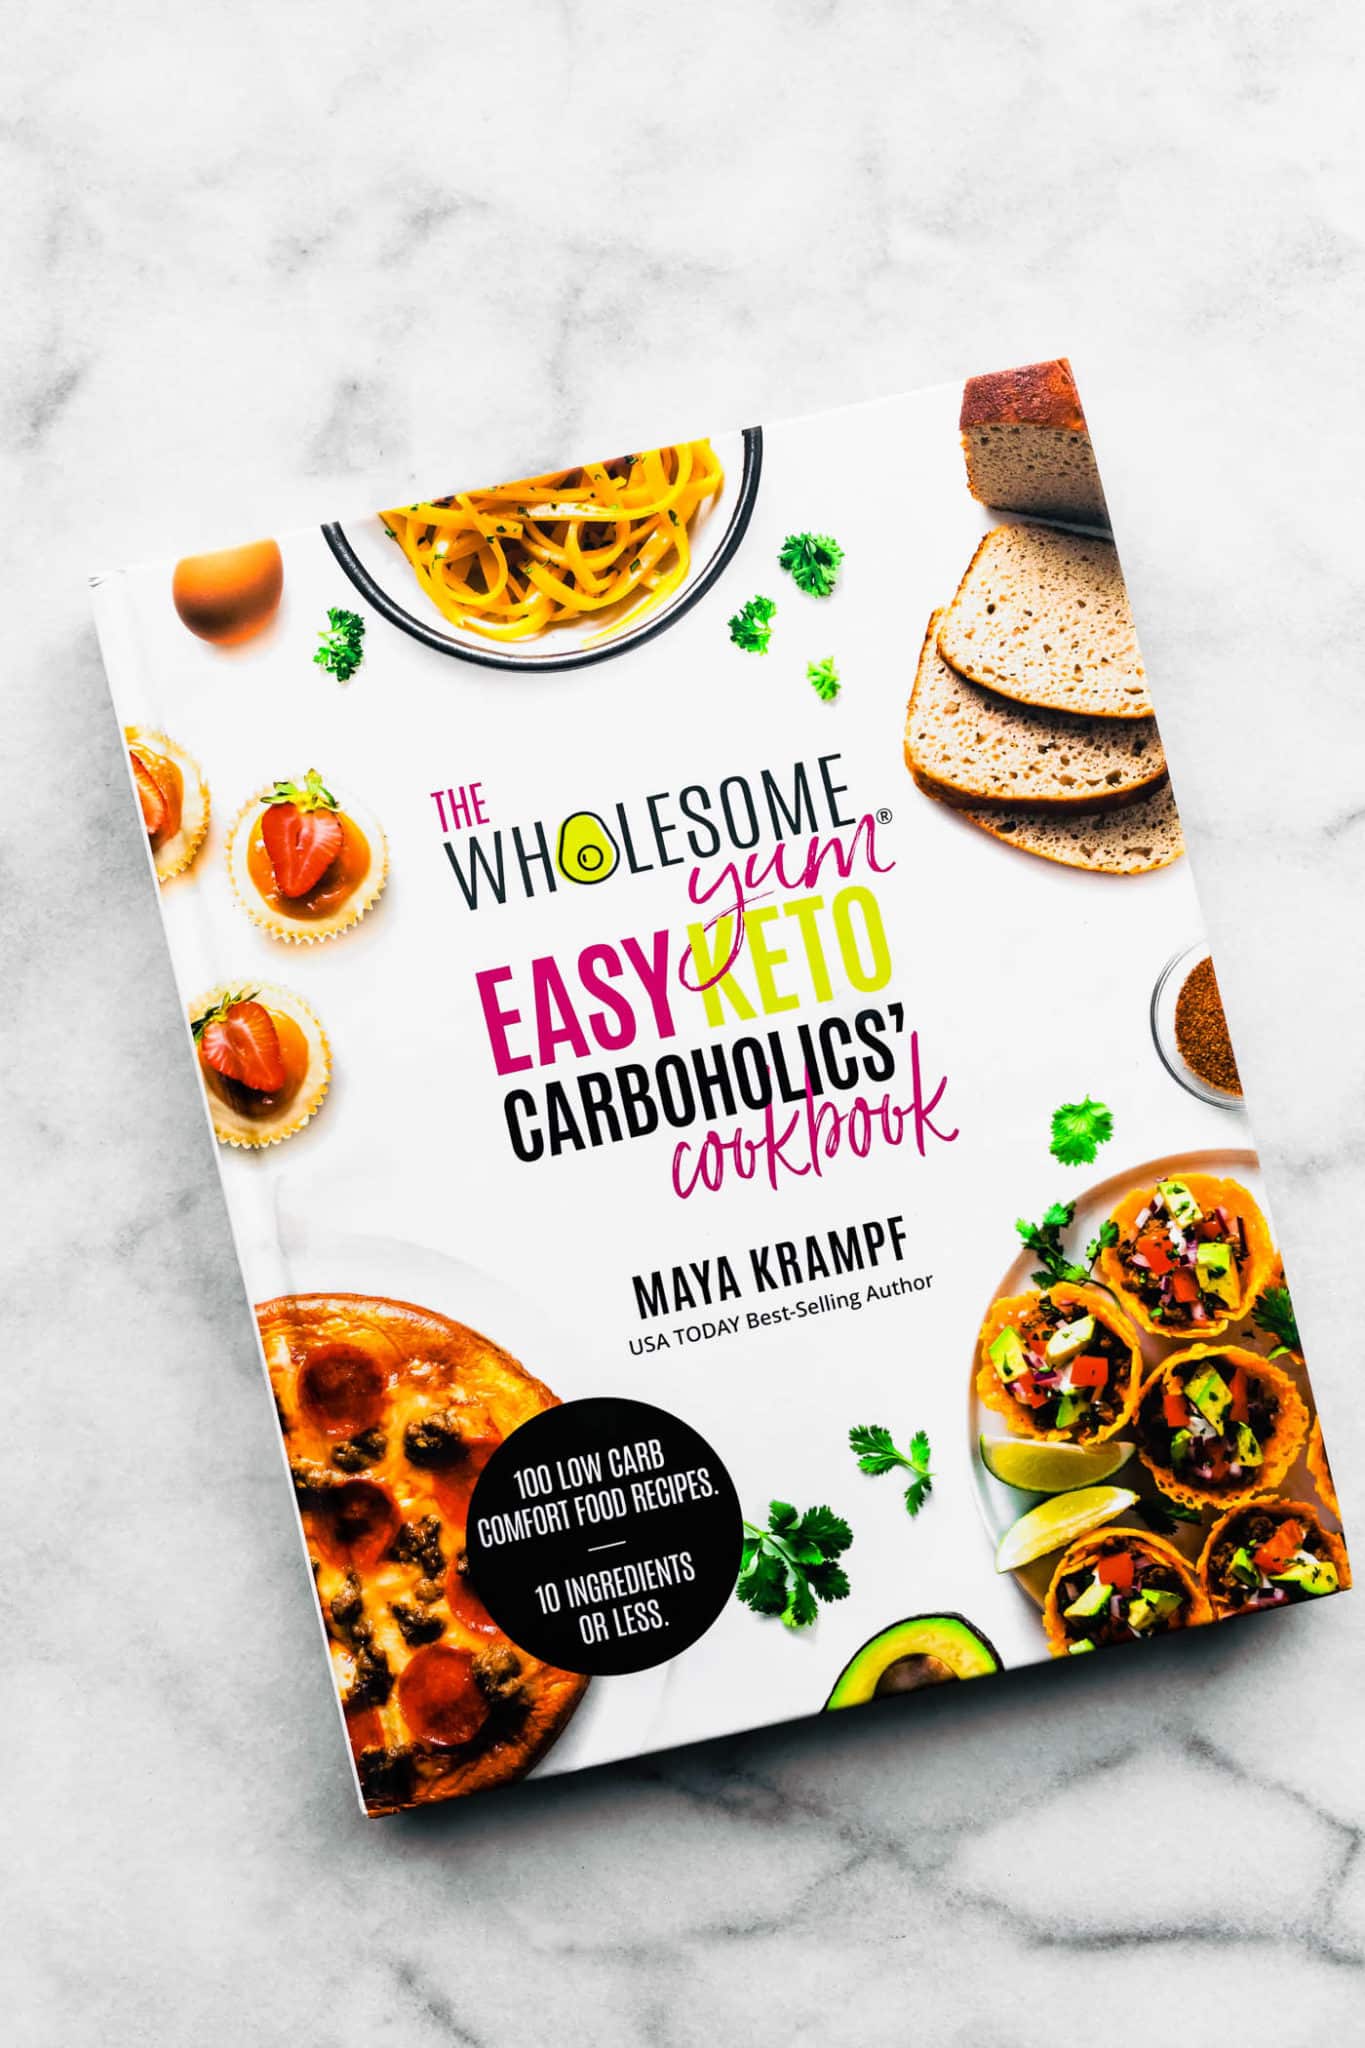 The Wholesome Yum Easy Keto Carboholics Cookbook by Maya Krampf